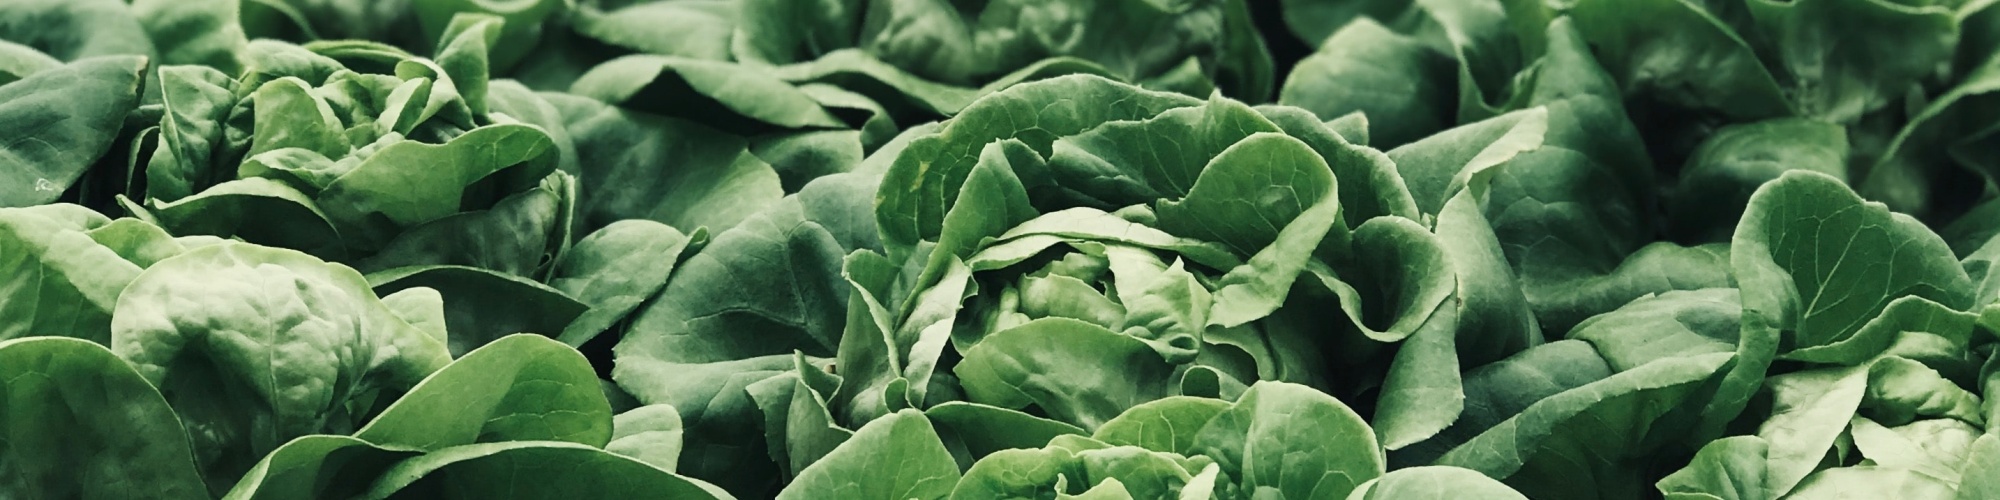 A photo of rows of lettuce in Montreal by pina messina (unsplash).